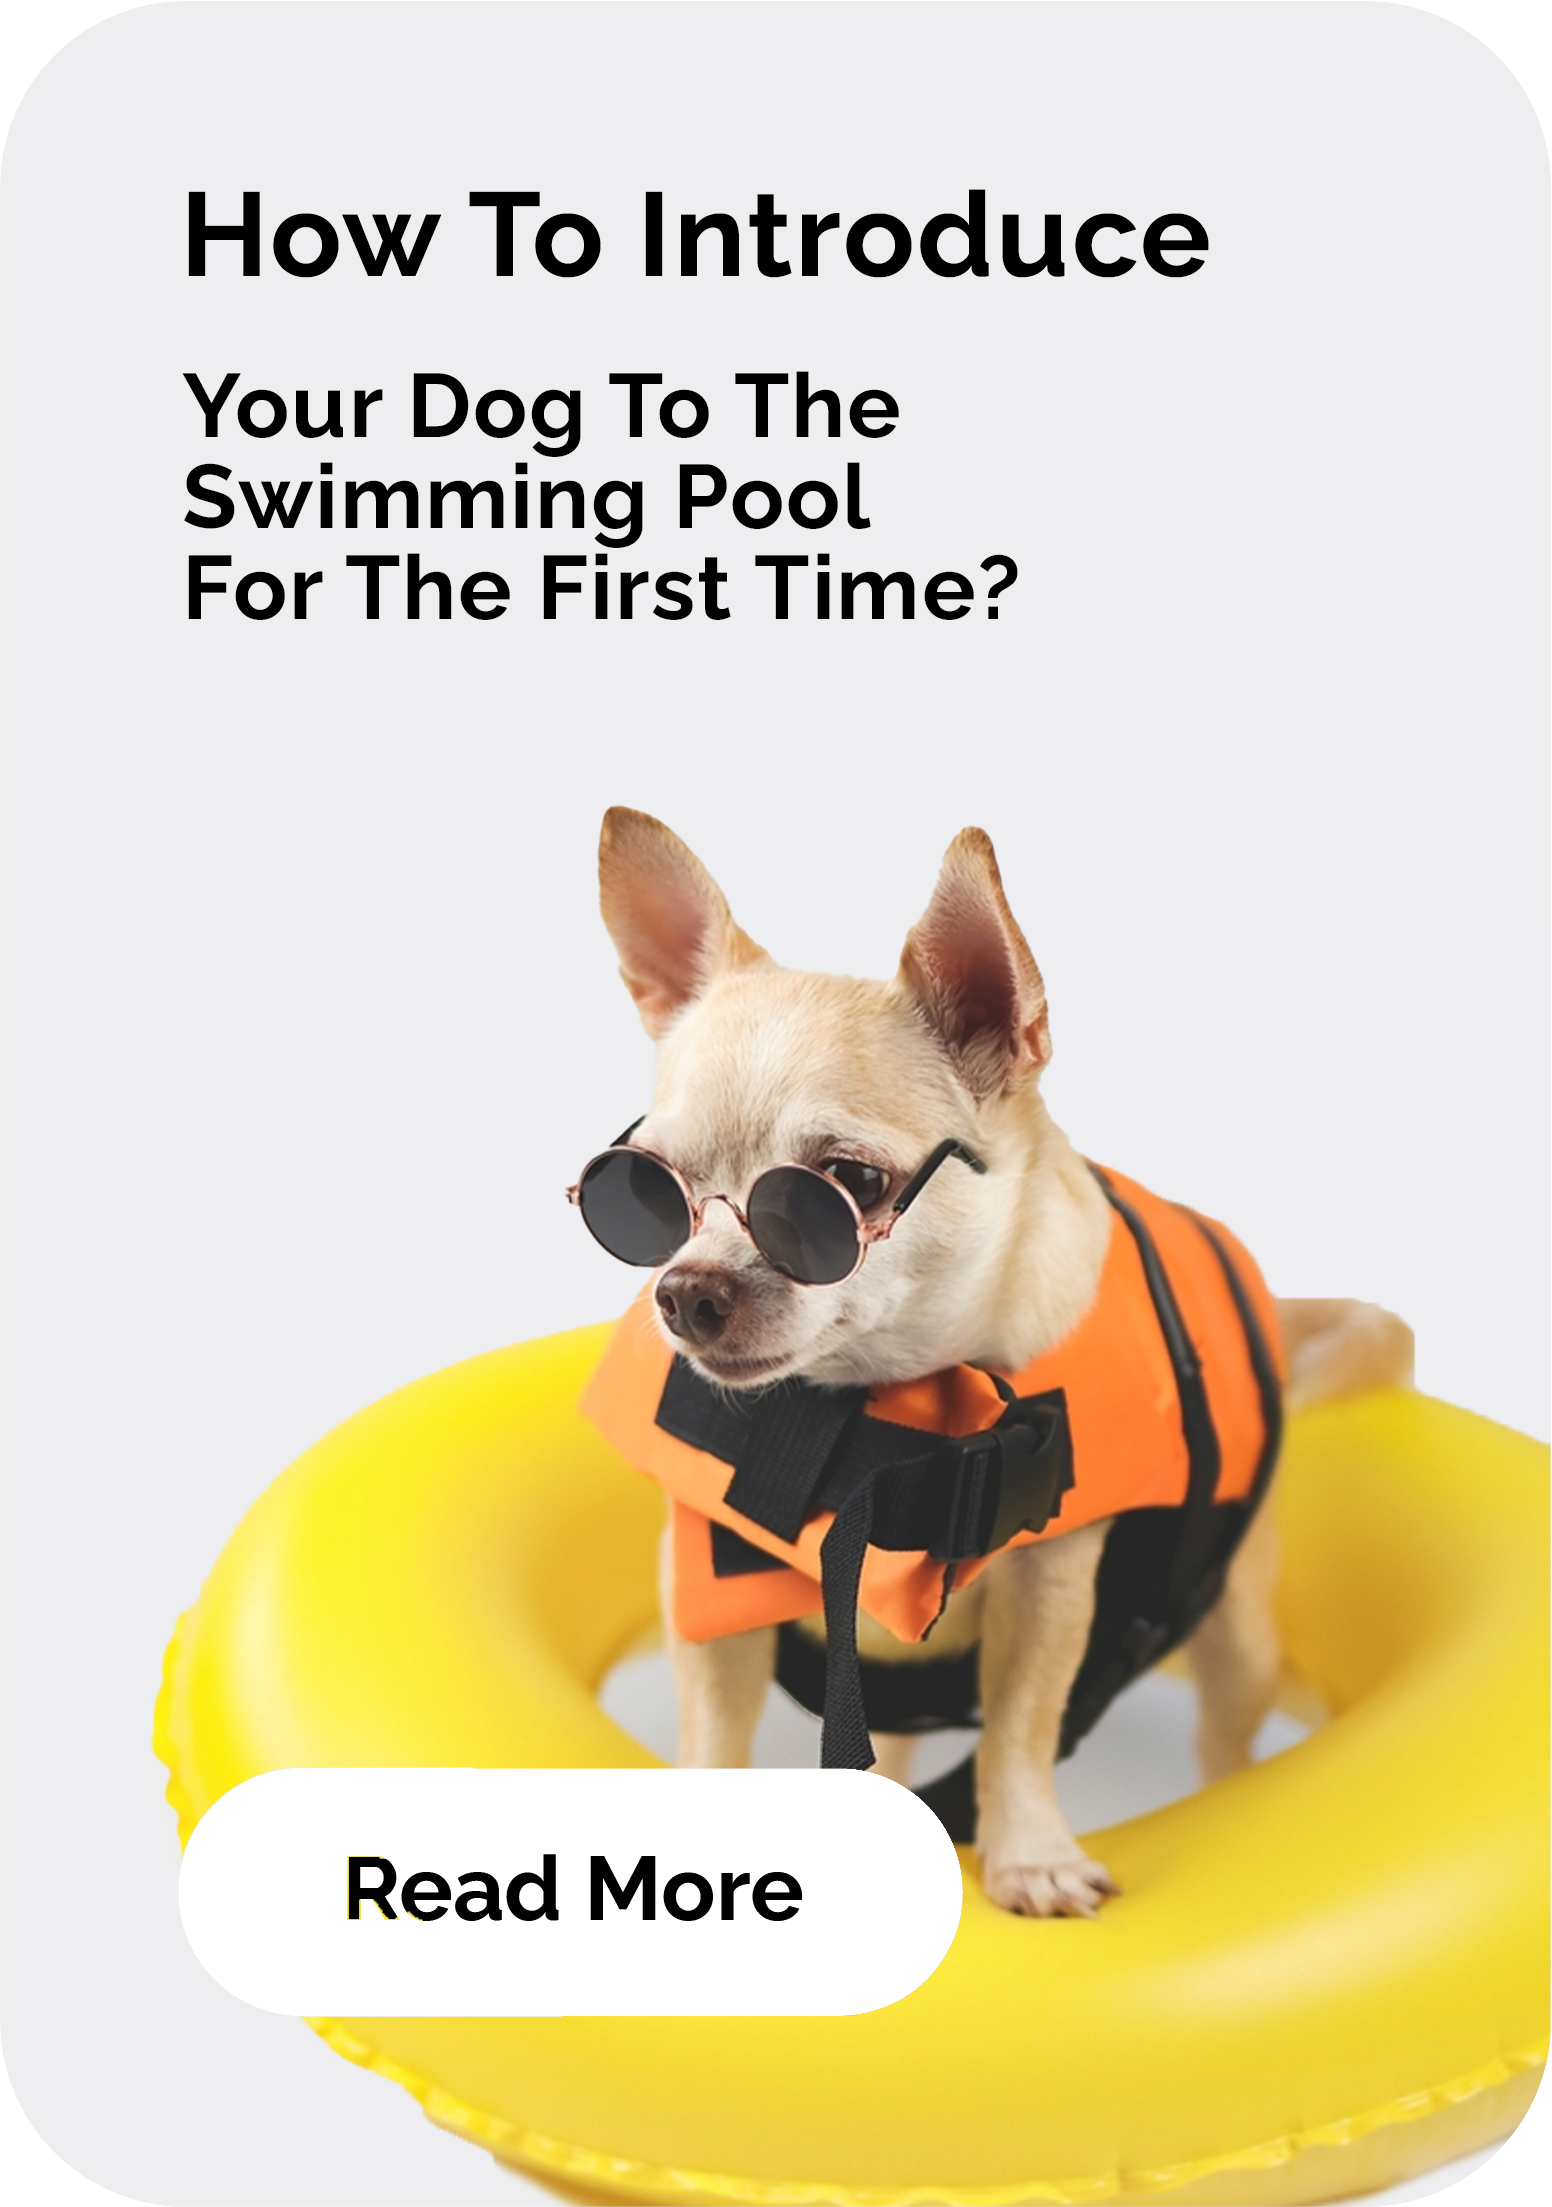 How To Introduce Your Dog To The Swimming Pool For The First Time